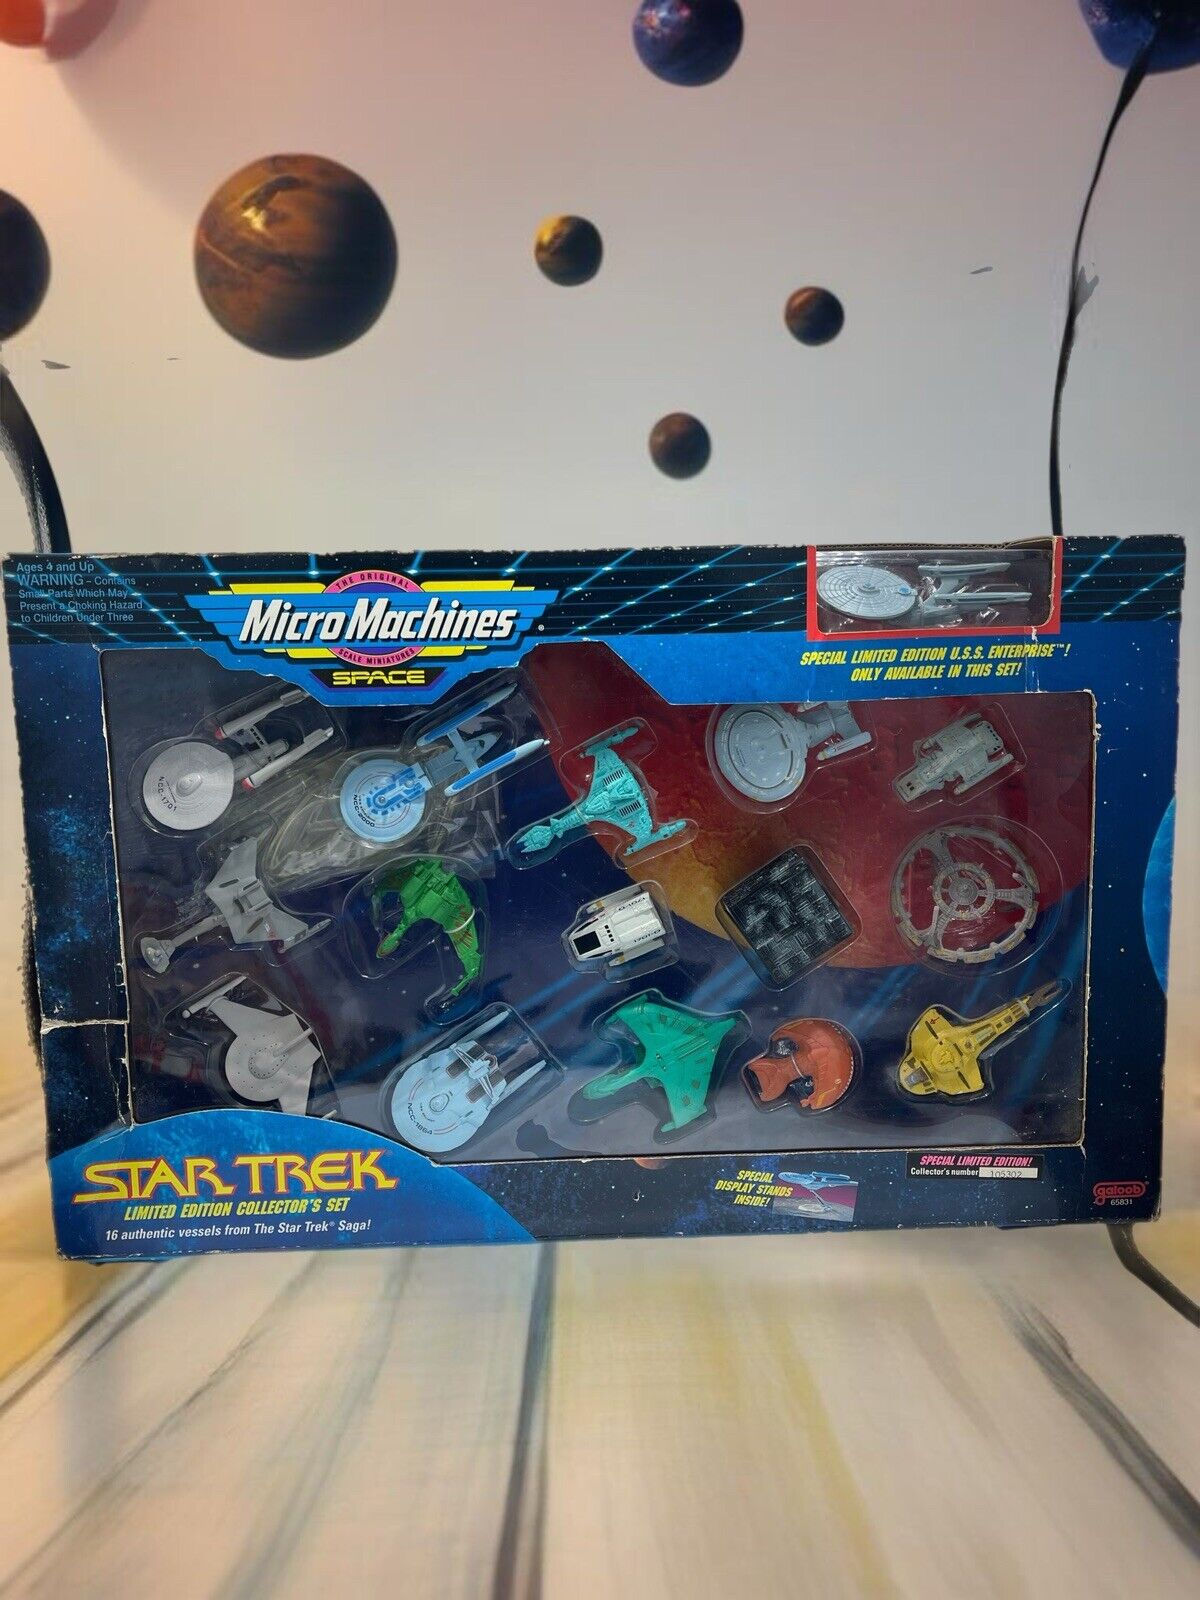 Galoob Micro Machines Star Trek Limited Edition Collector's Set From 1993